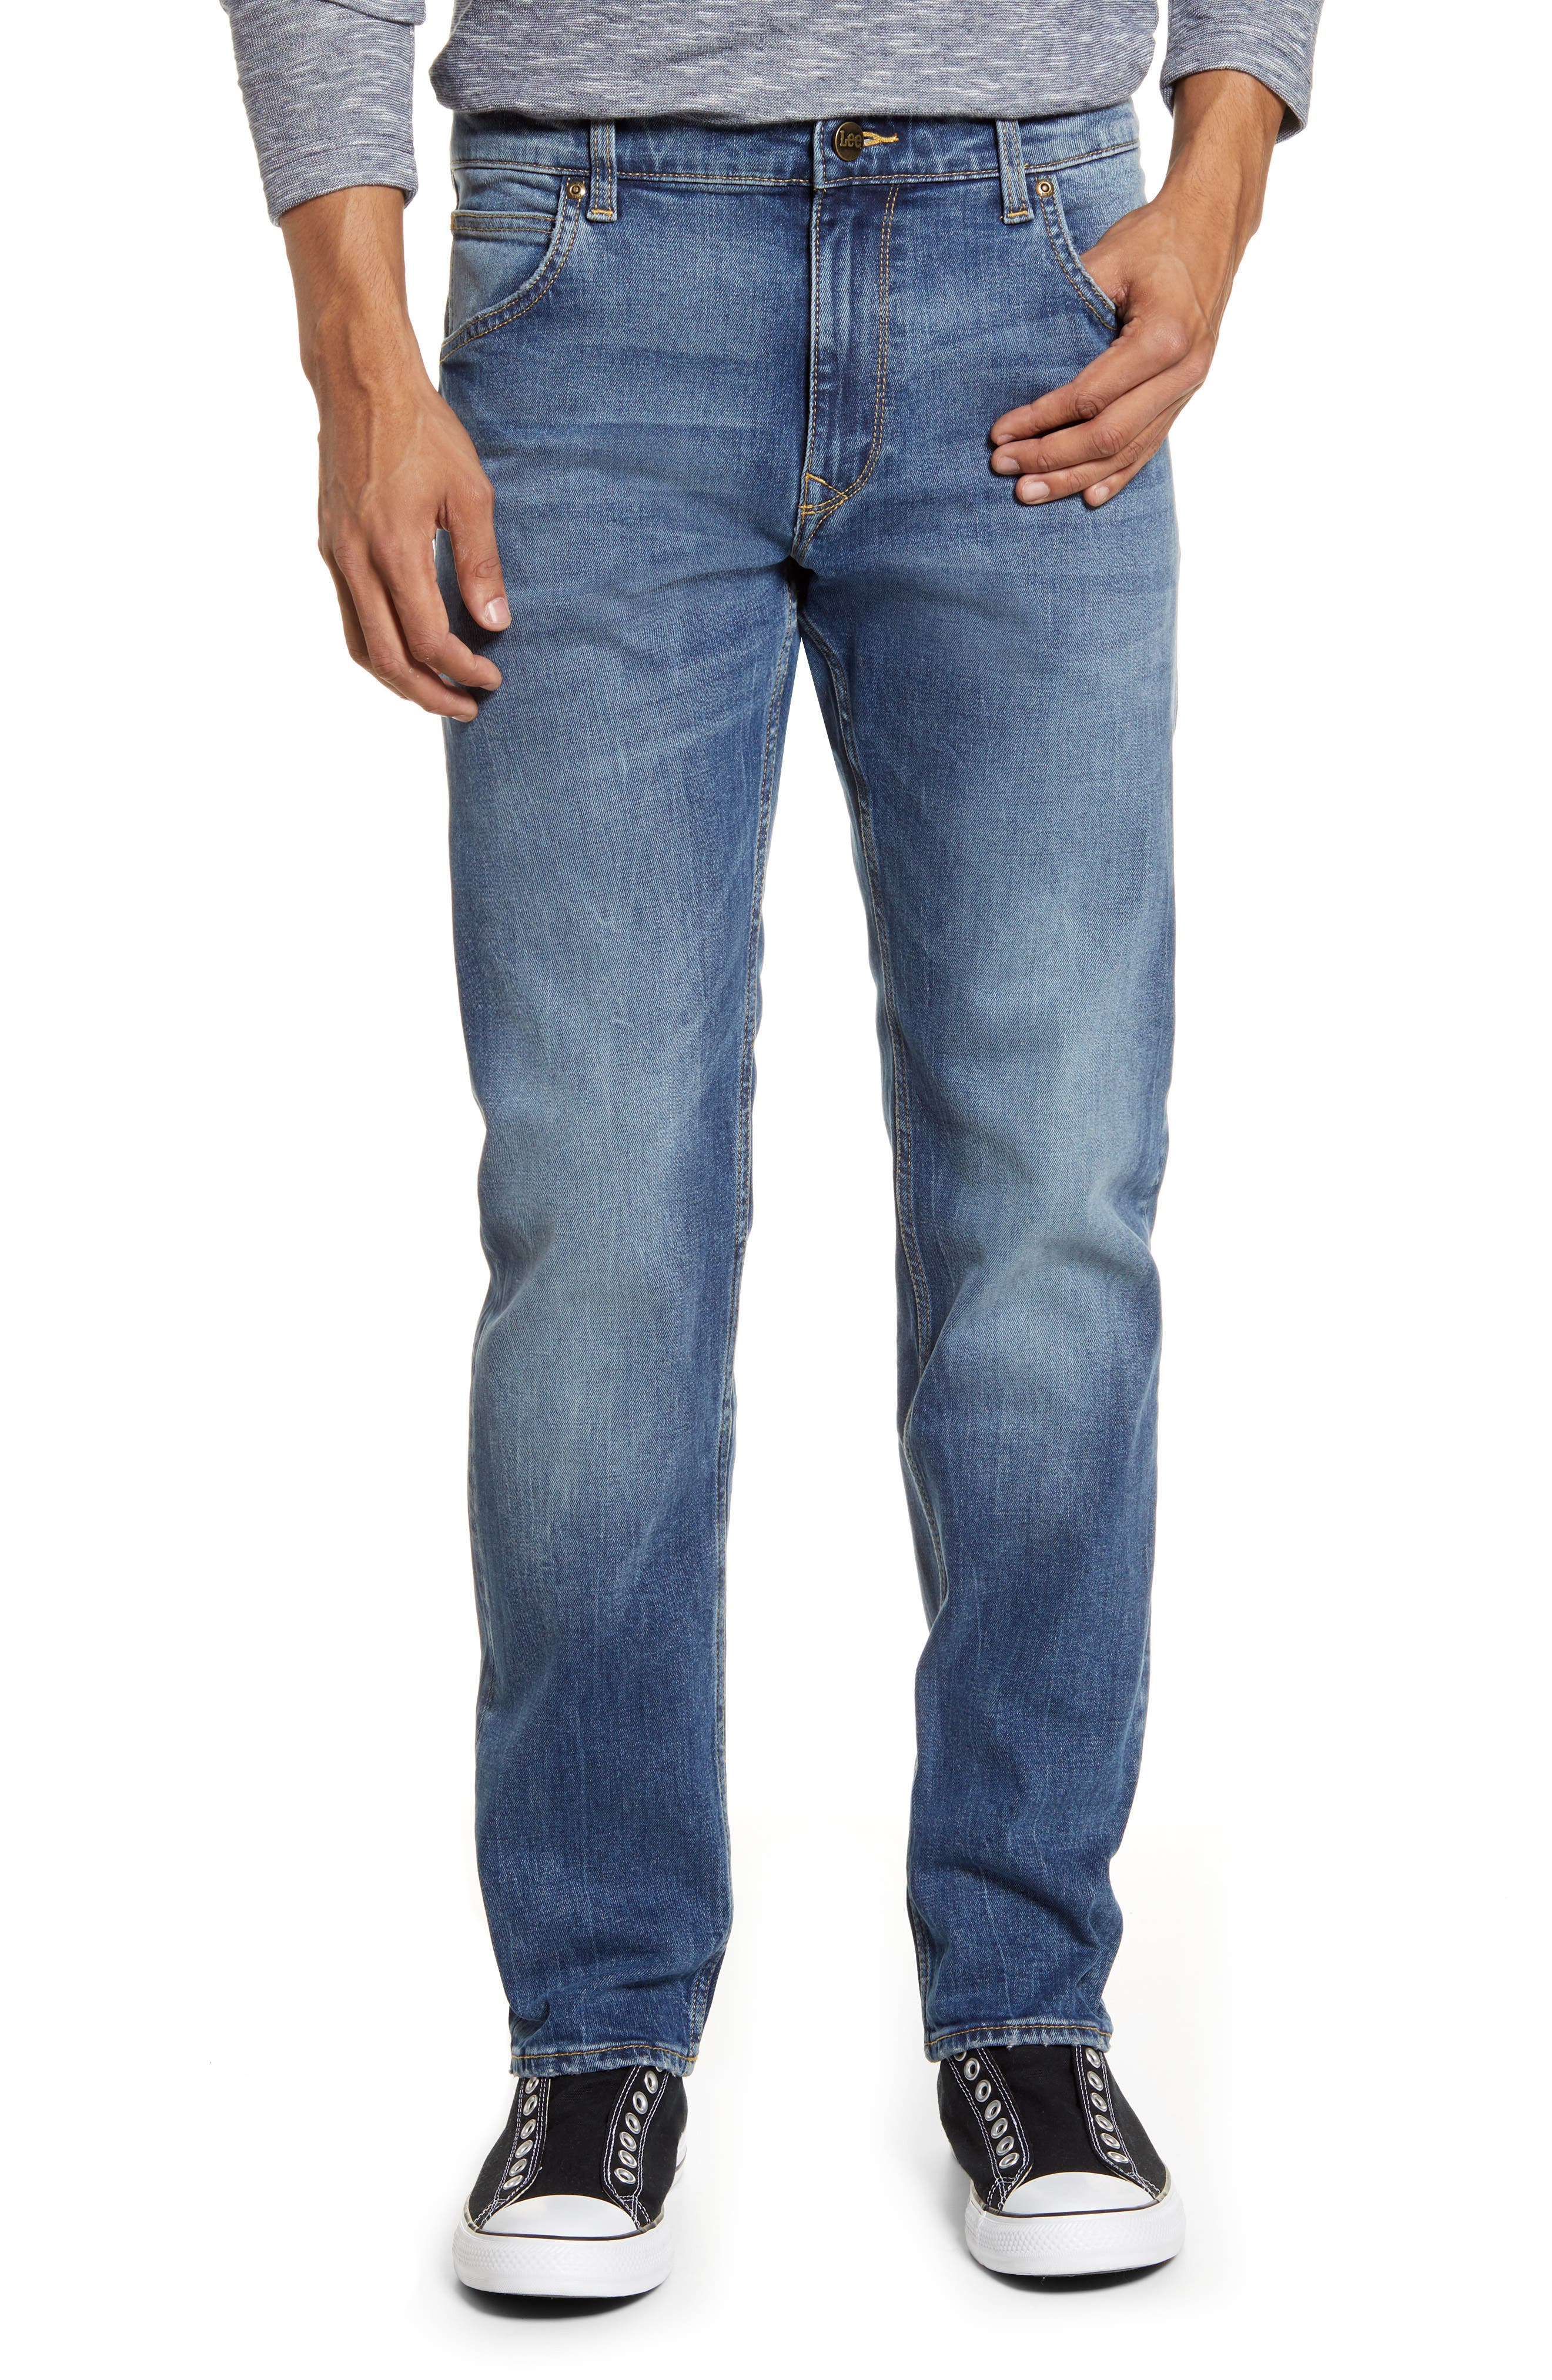 lee jeans sale clearance